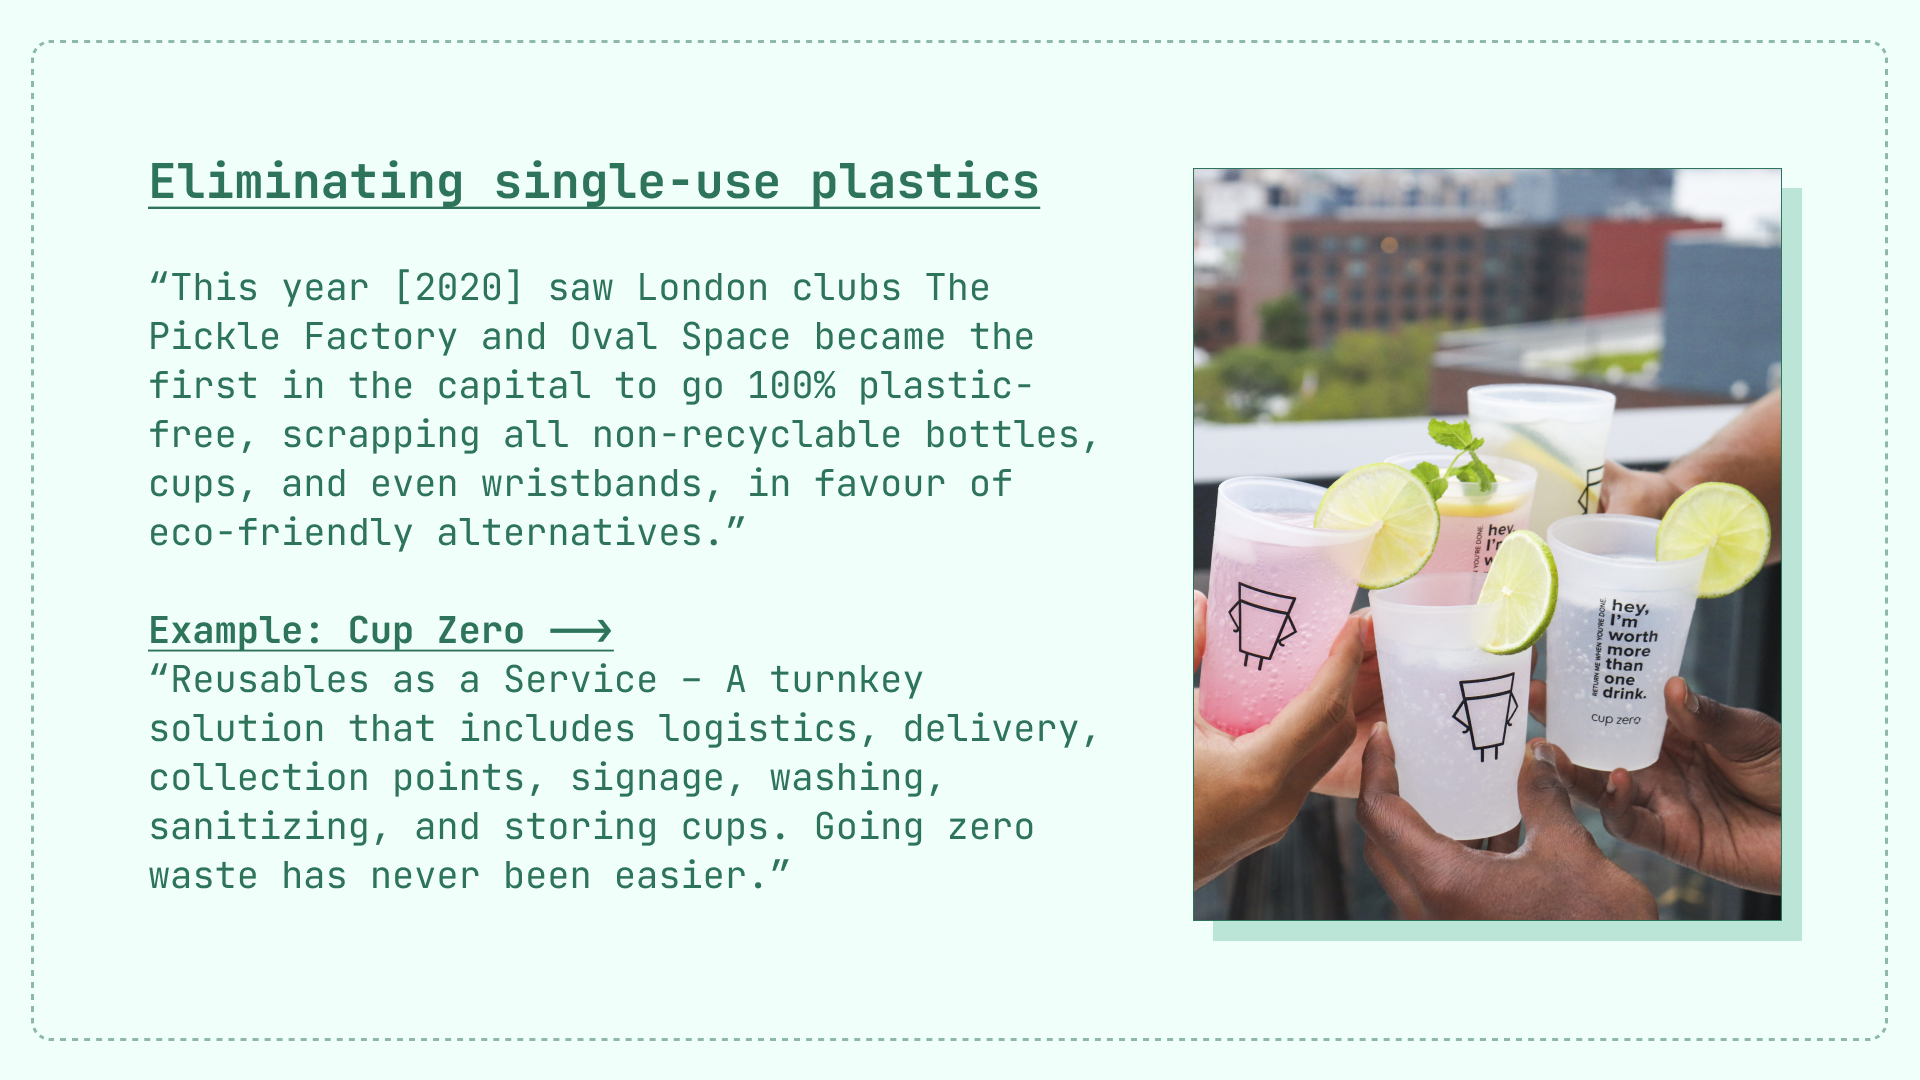 A slide about music spaces making an effort to eliminate single use plastics.